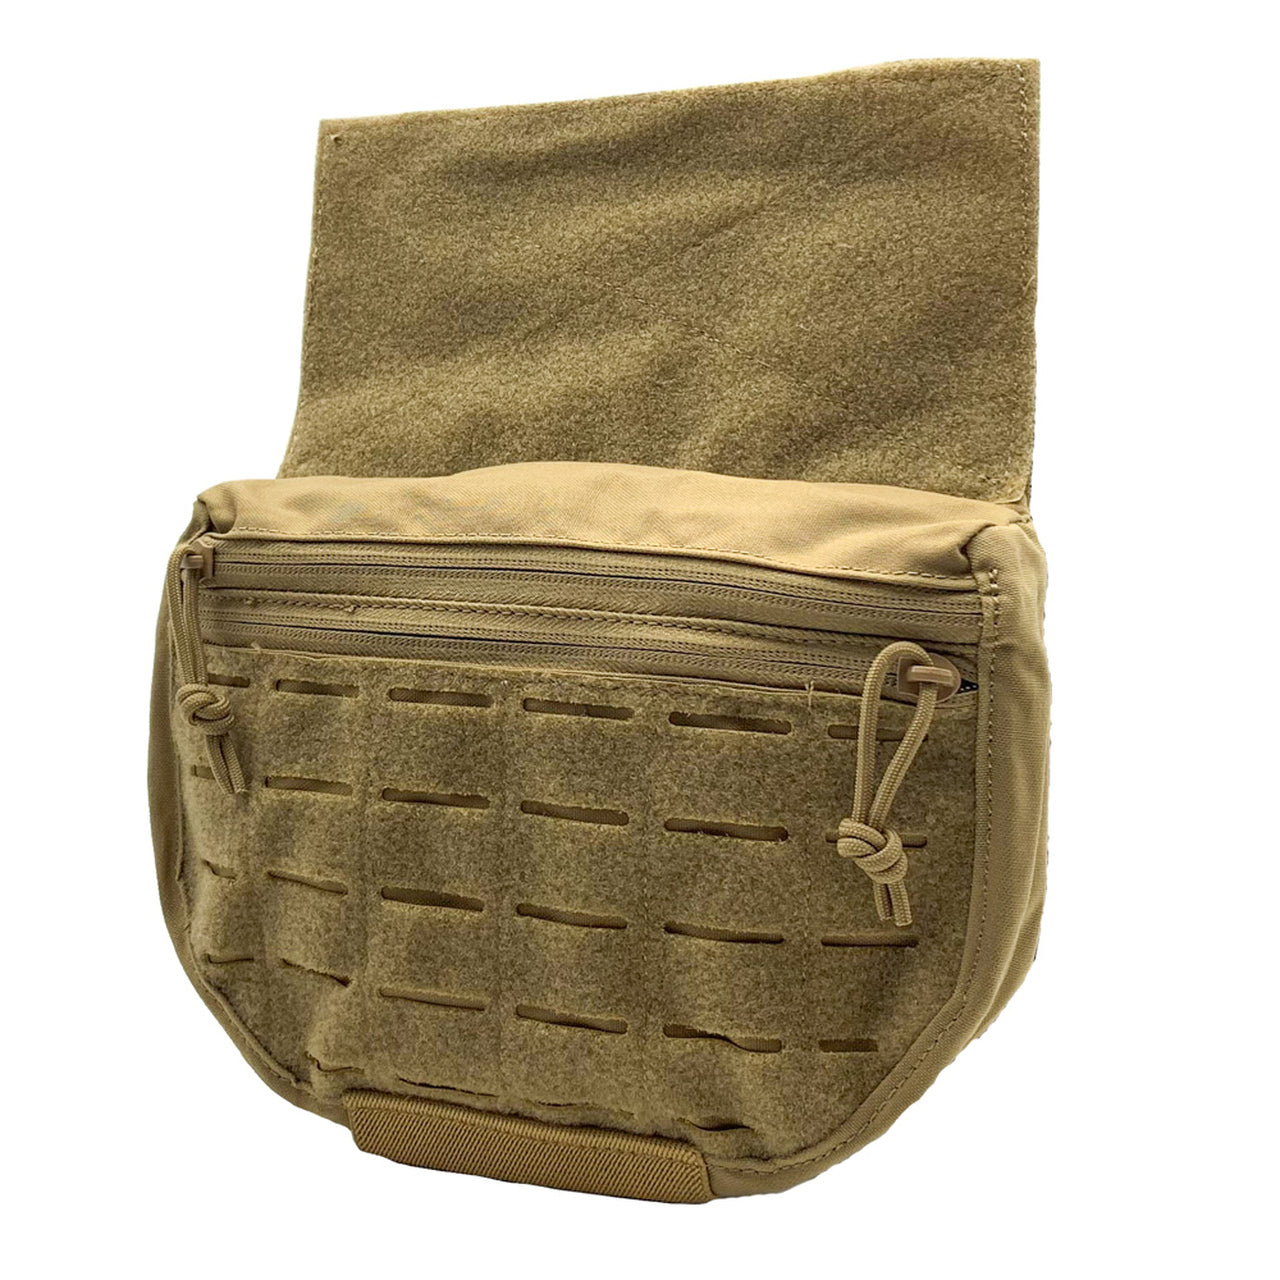 A Shellback Tactical Flap Sac 2.0 on a white background.